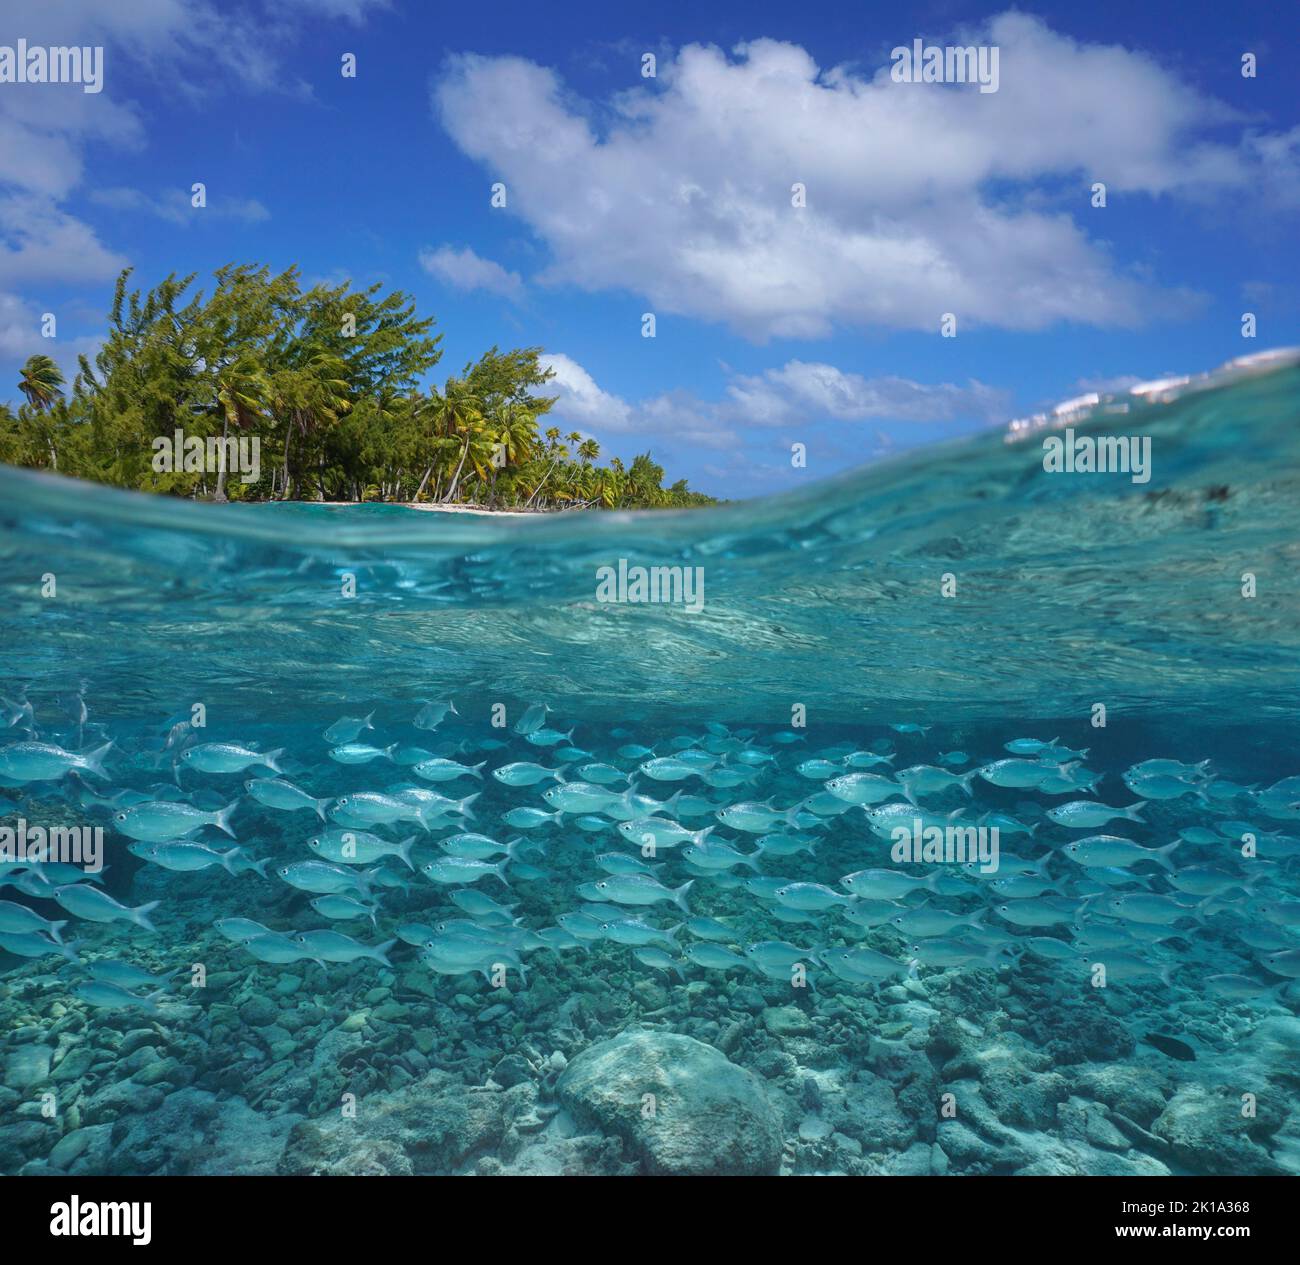 School of fish (flagtail) near tropical sea shore, split level view over and under water surface, Tikehau, French Polynesia, Pacific ocean Stock Photo